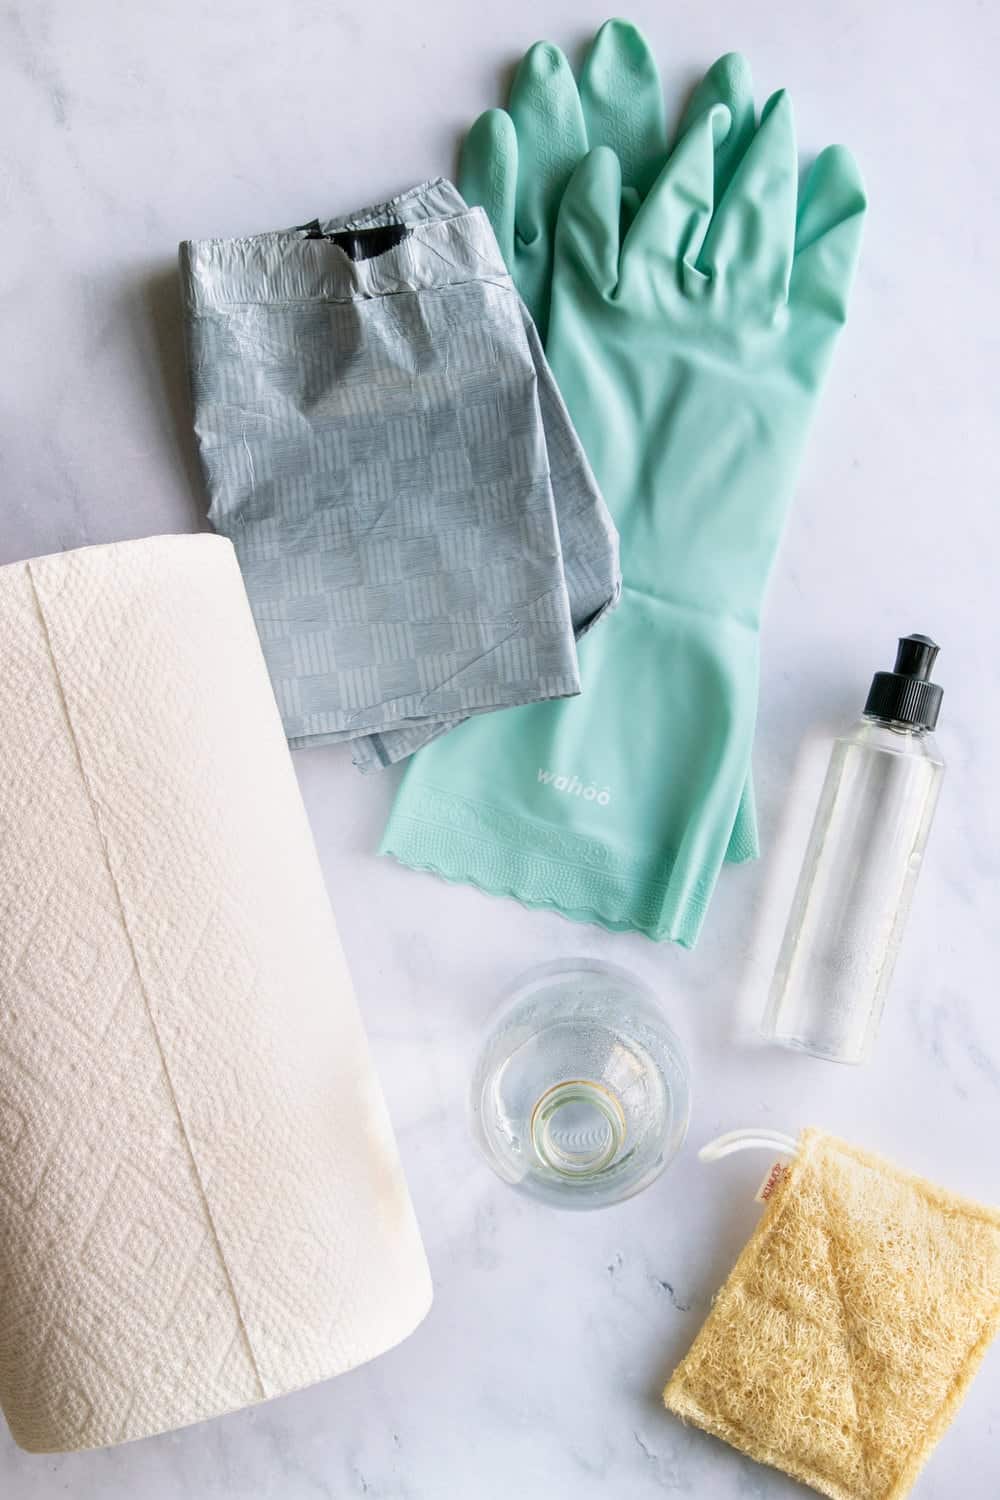 Cleaning Supplies for Homemade Soap Making